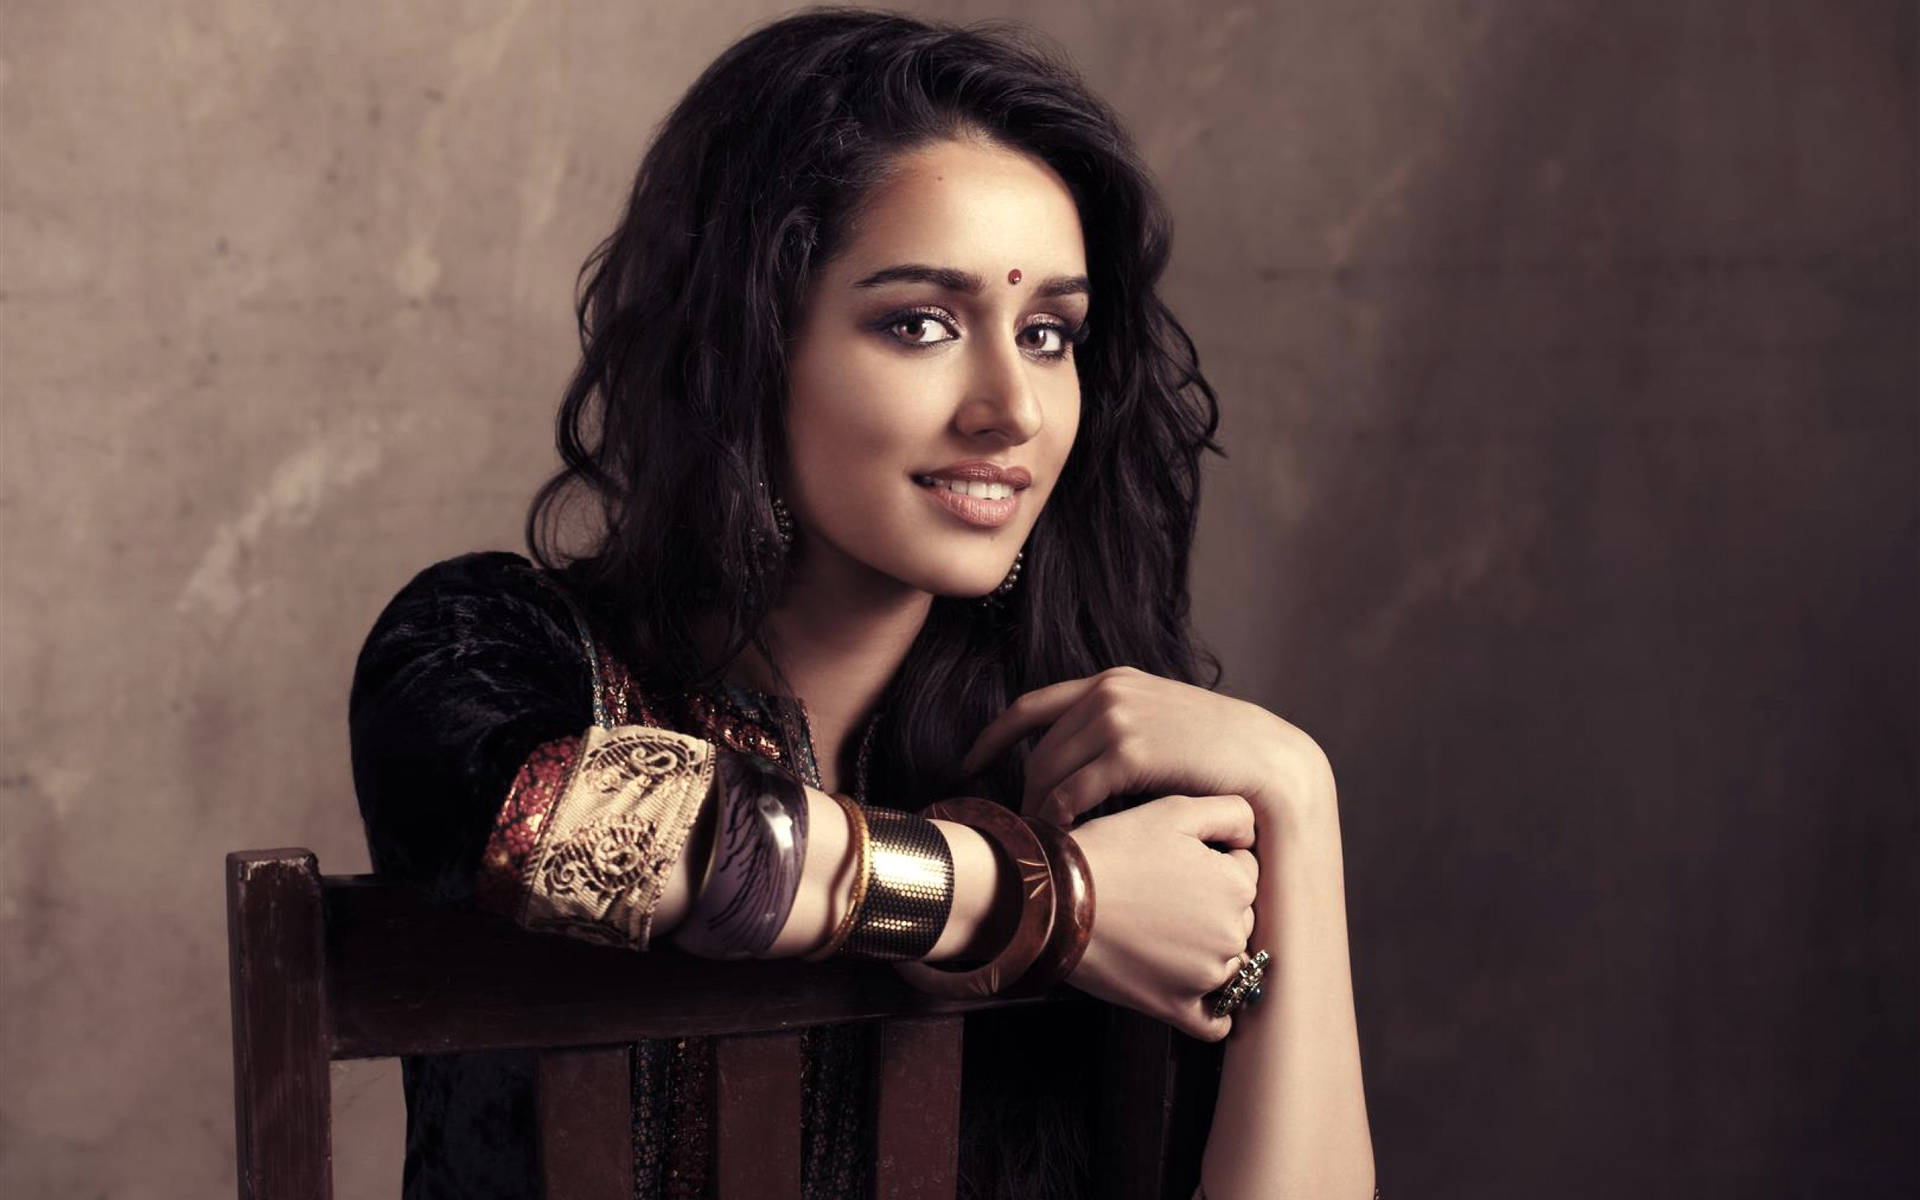 Top 999+ Shraddha Kapoor Wallpapers Full HD, 4K✅Free to Use